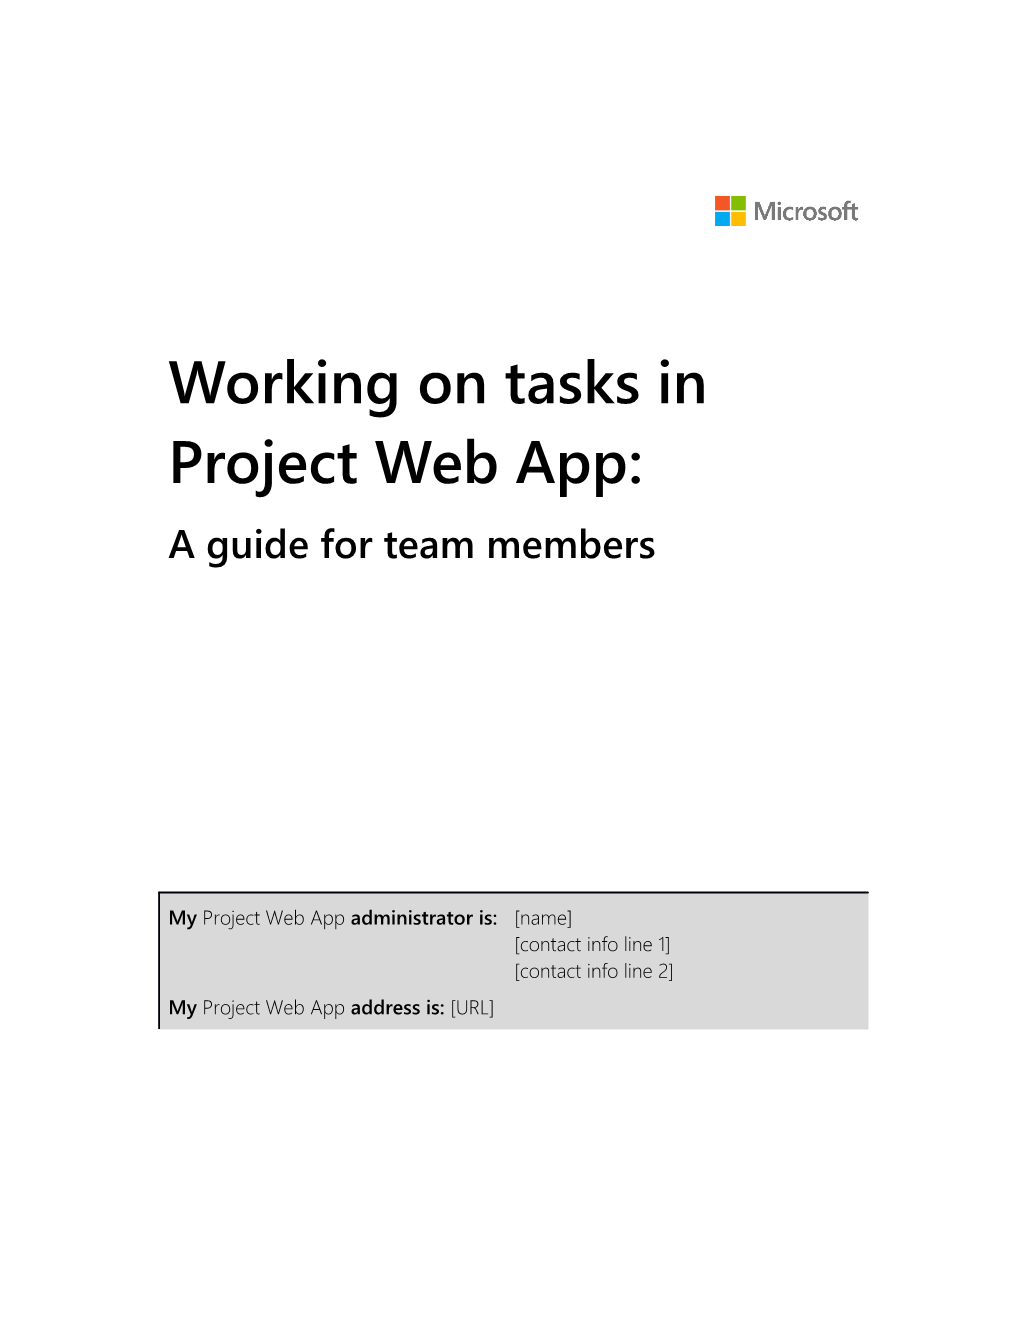 Working on Tasks in Project Web App